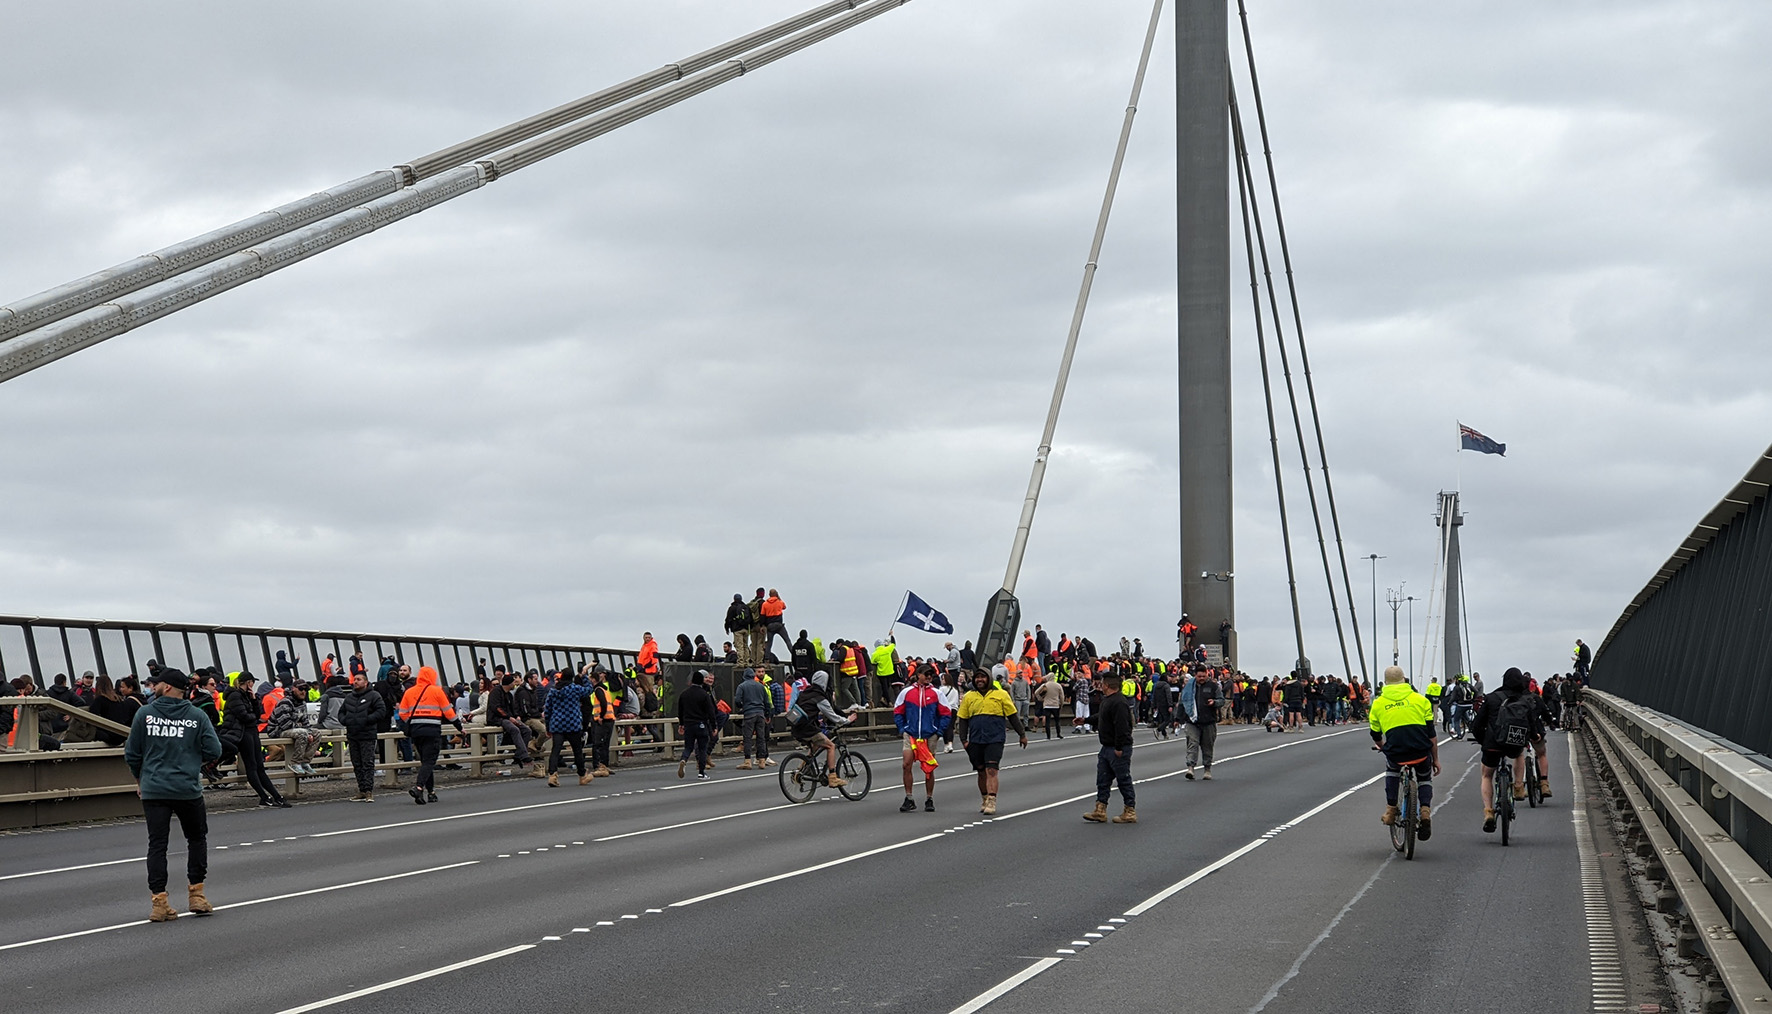 Protesters on top of the Westgate Bridge